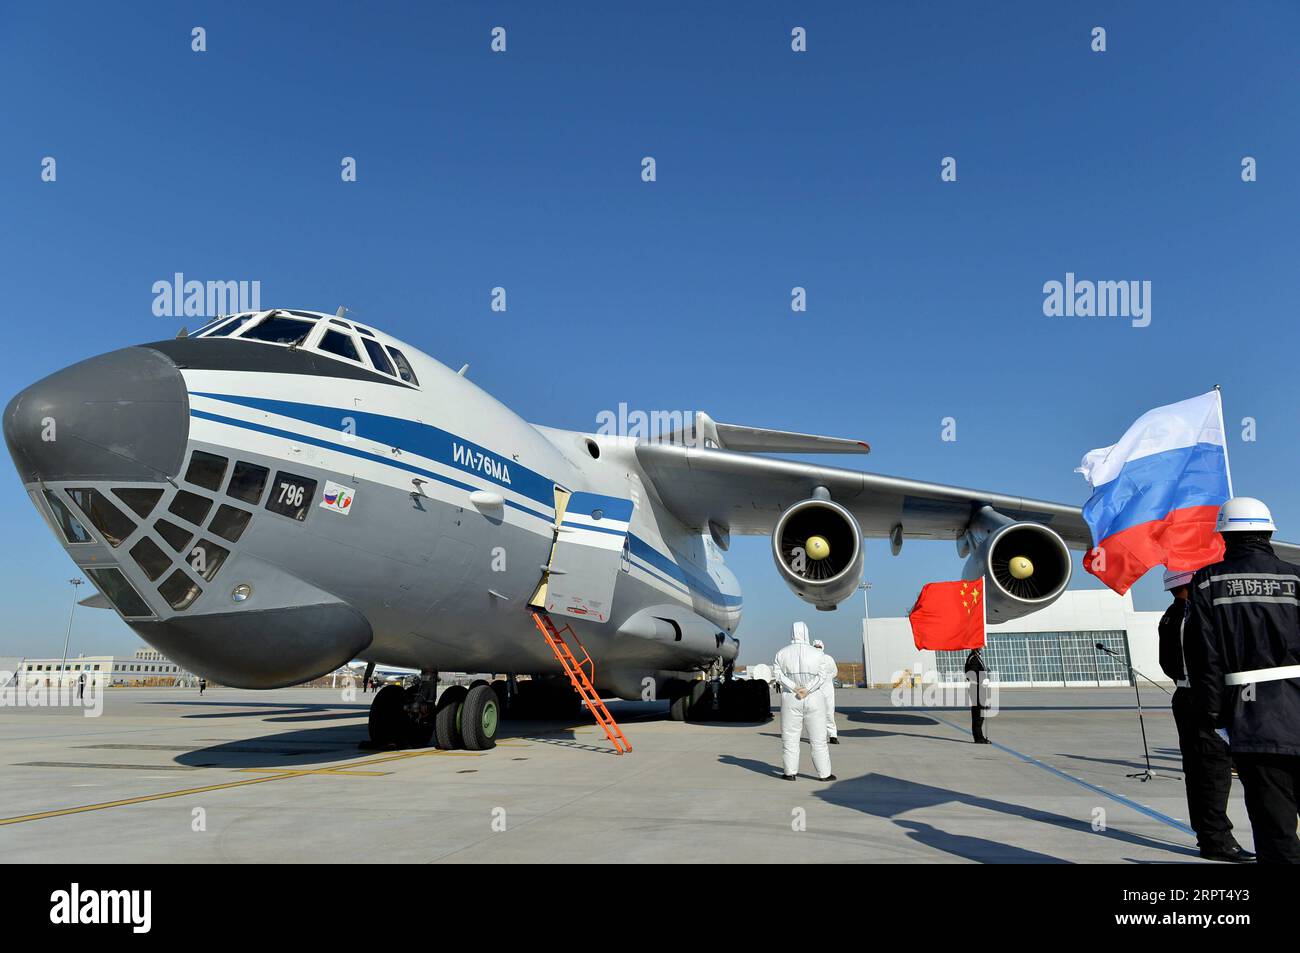 200411 -- HARBIN, April 11, 2020 -- A plane carrying Chinese medical  experts is seen at the airport in Harbin, northeast China s Heilongjiang  Province, April 11, 2020. A team of 10